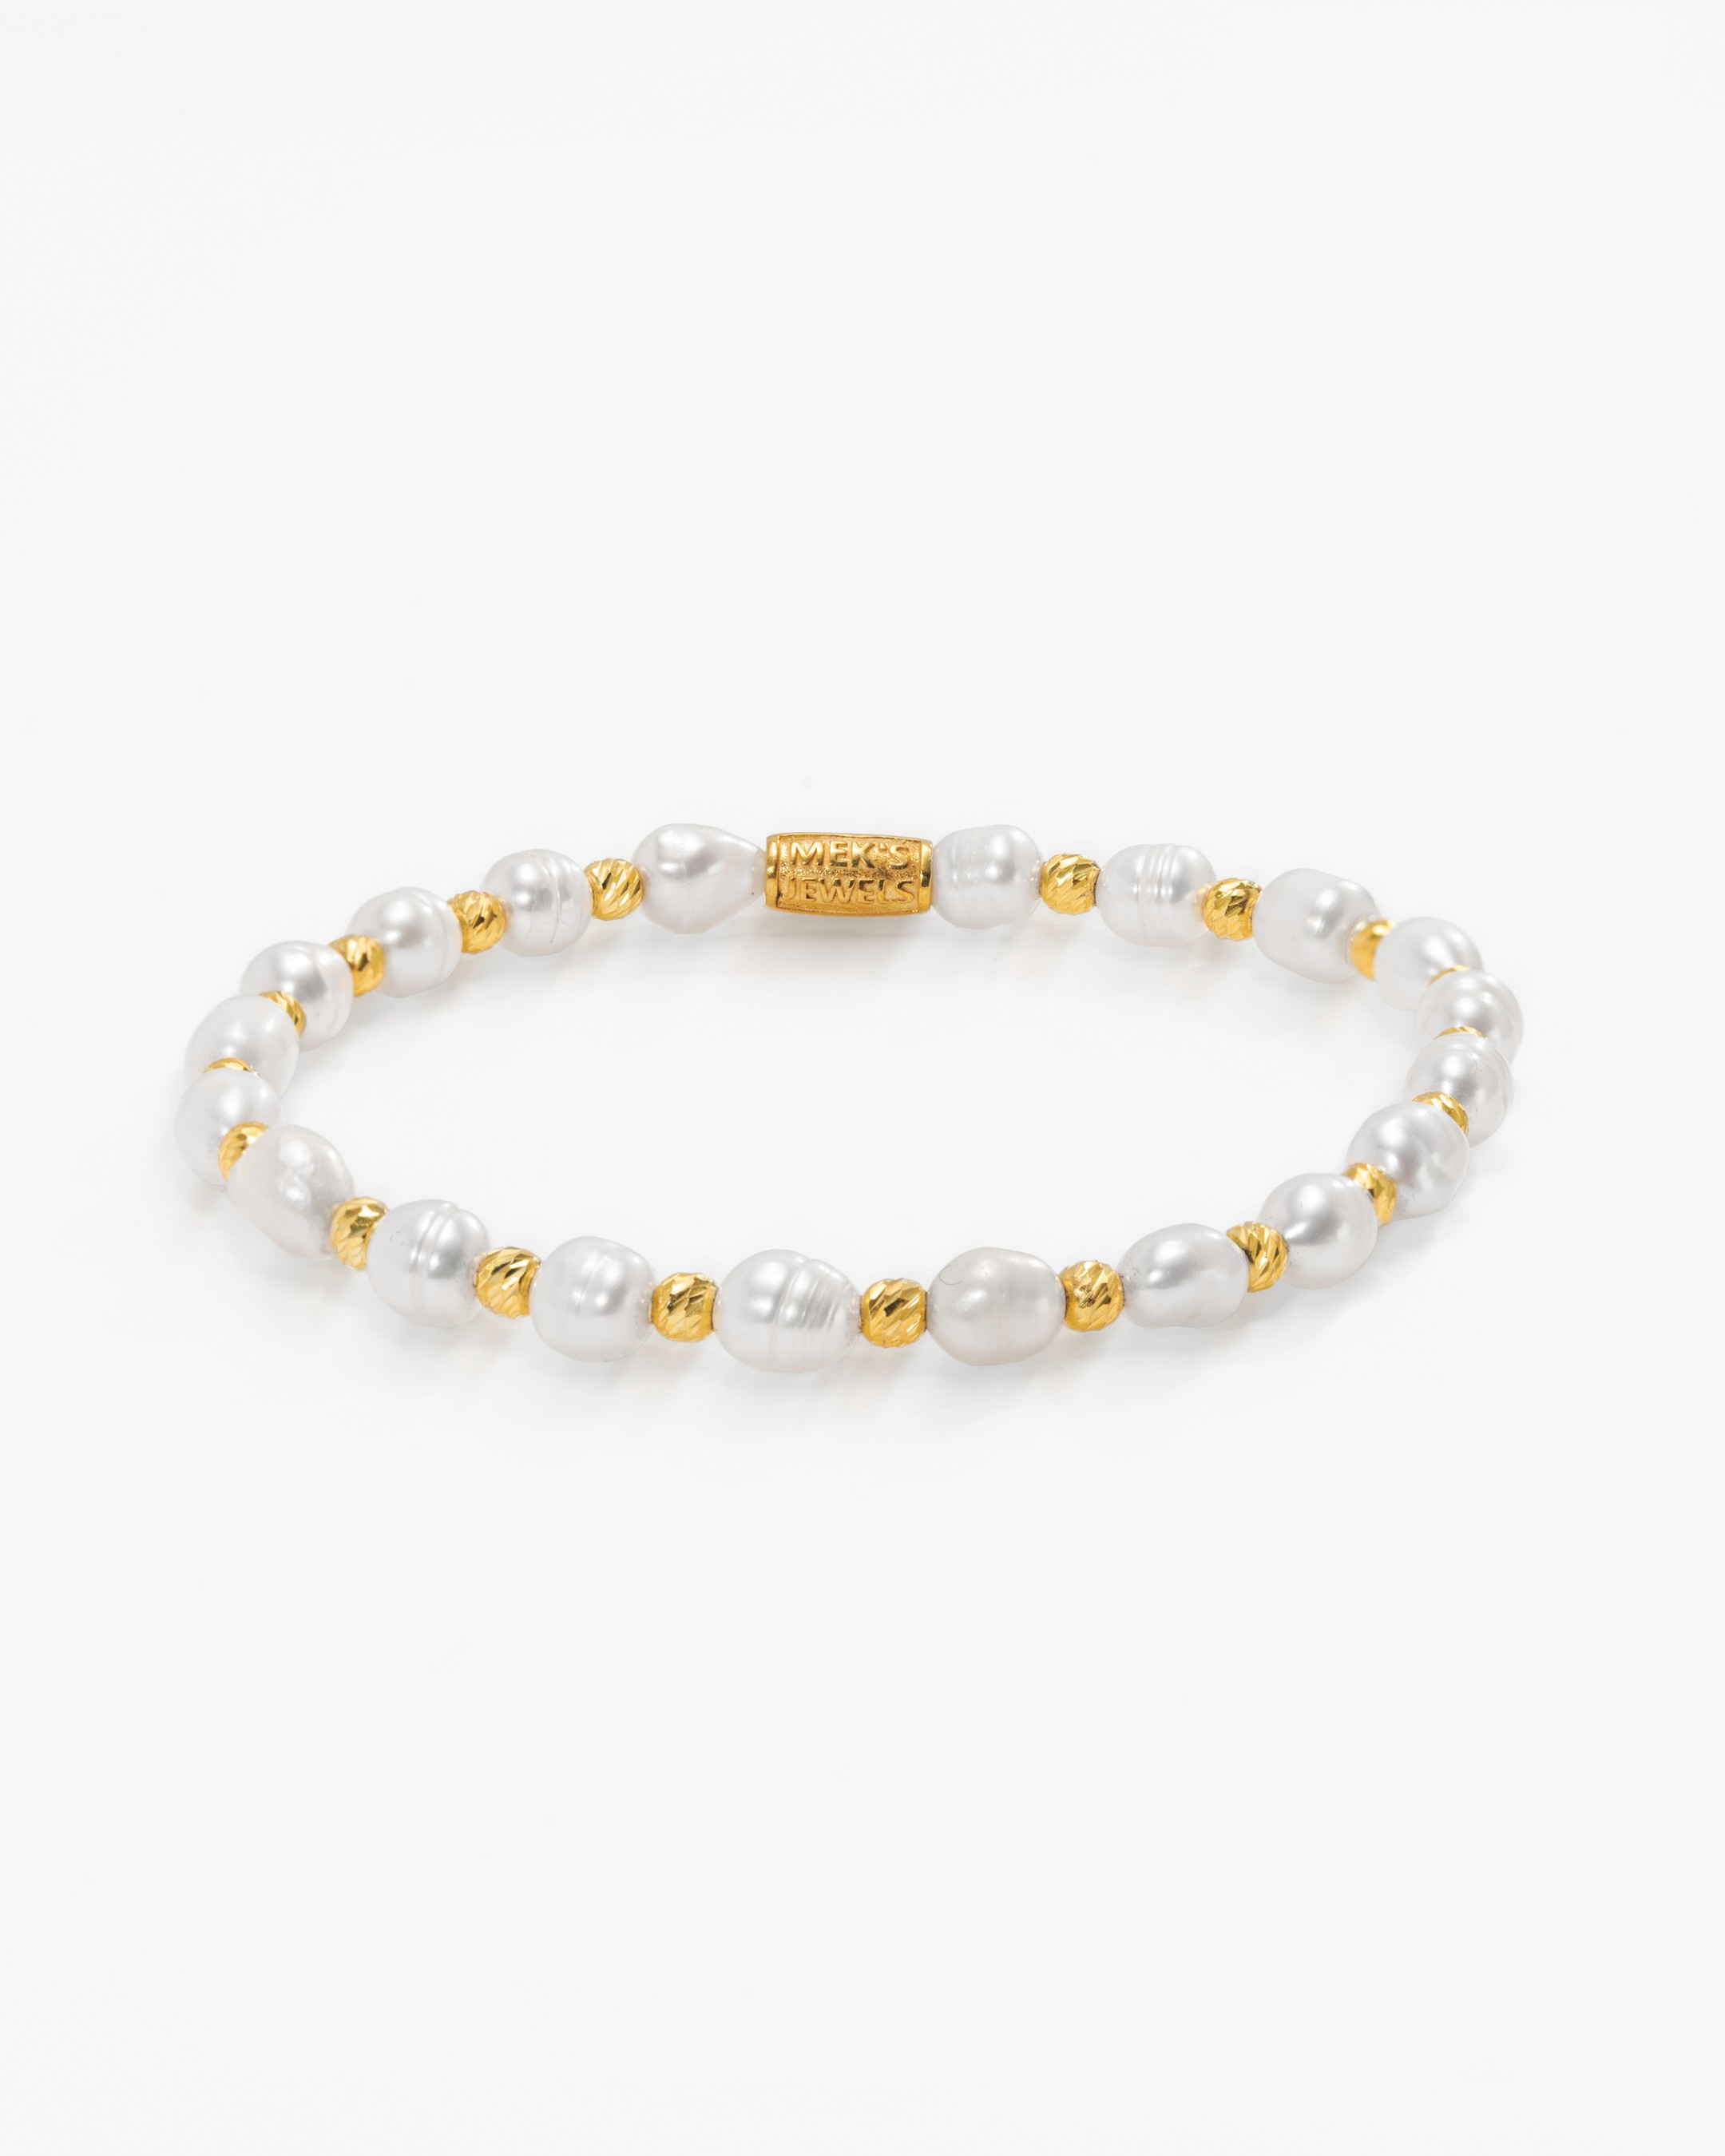 20.15 Carat Silver Bracelet with Natural Pearl Stones - Gold